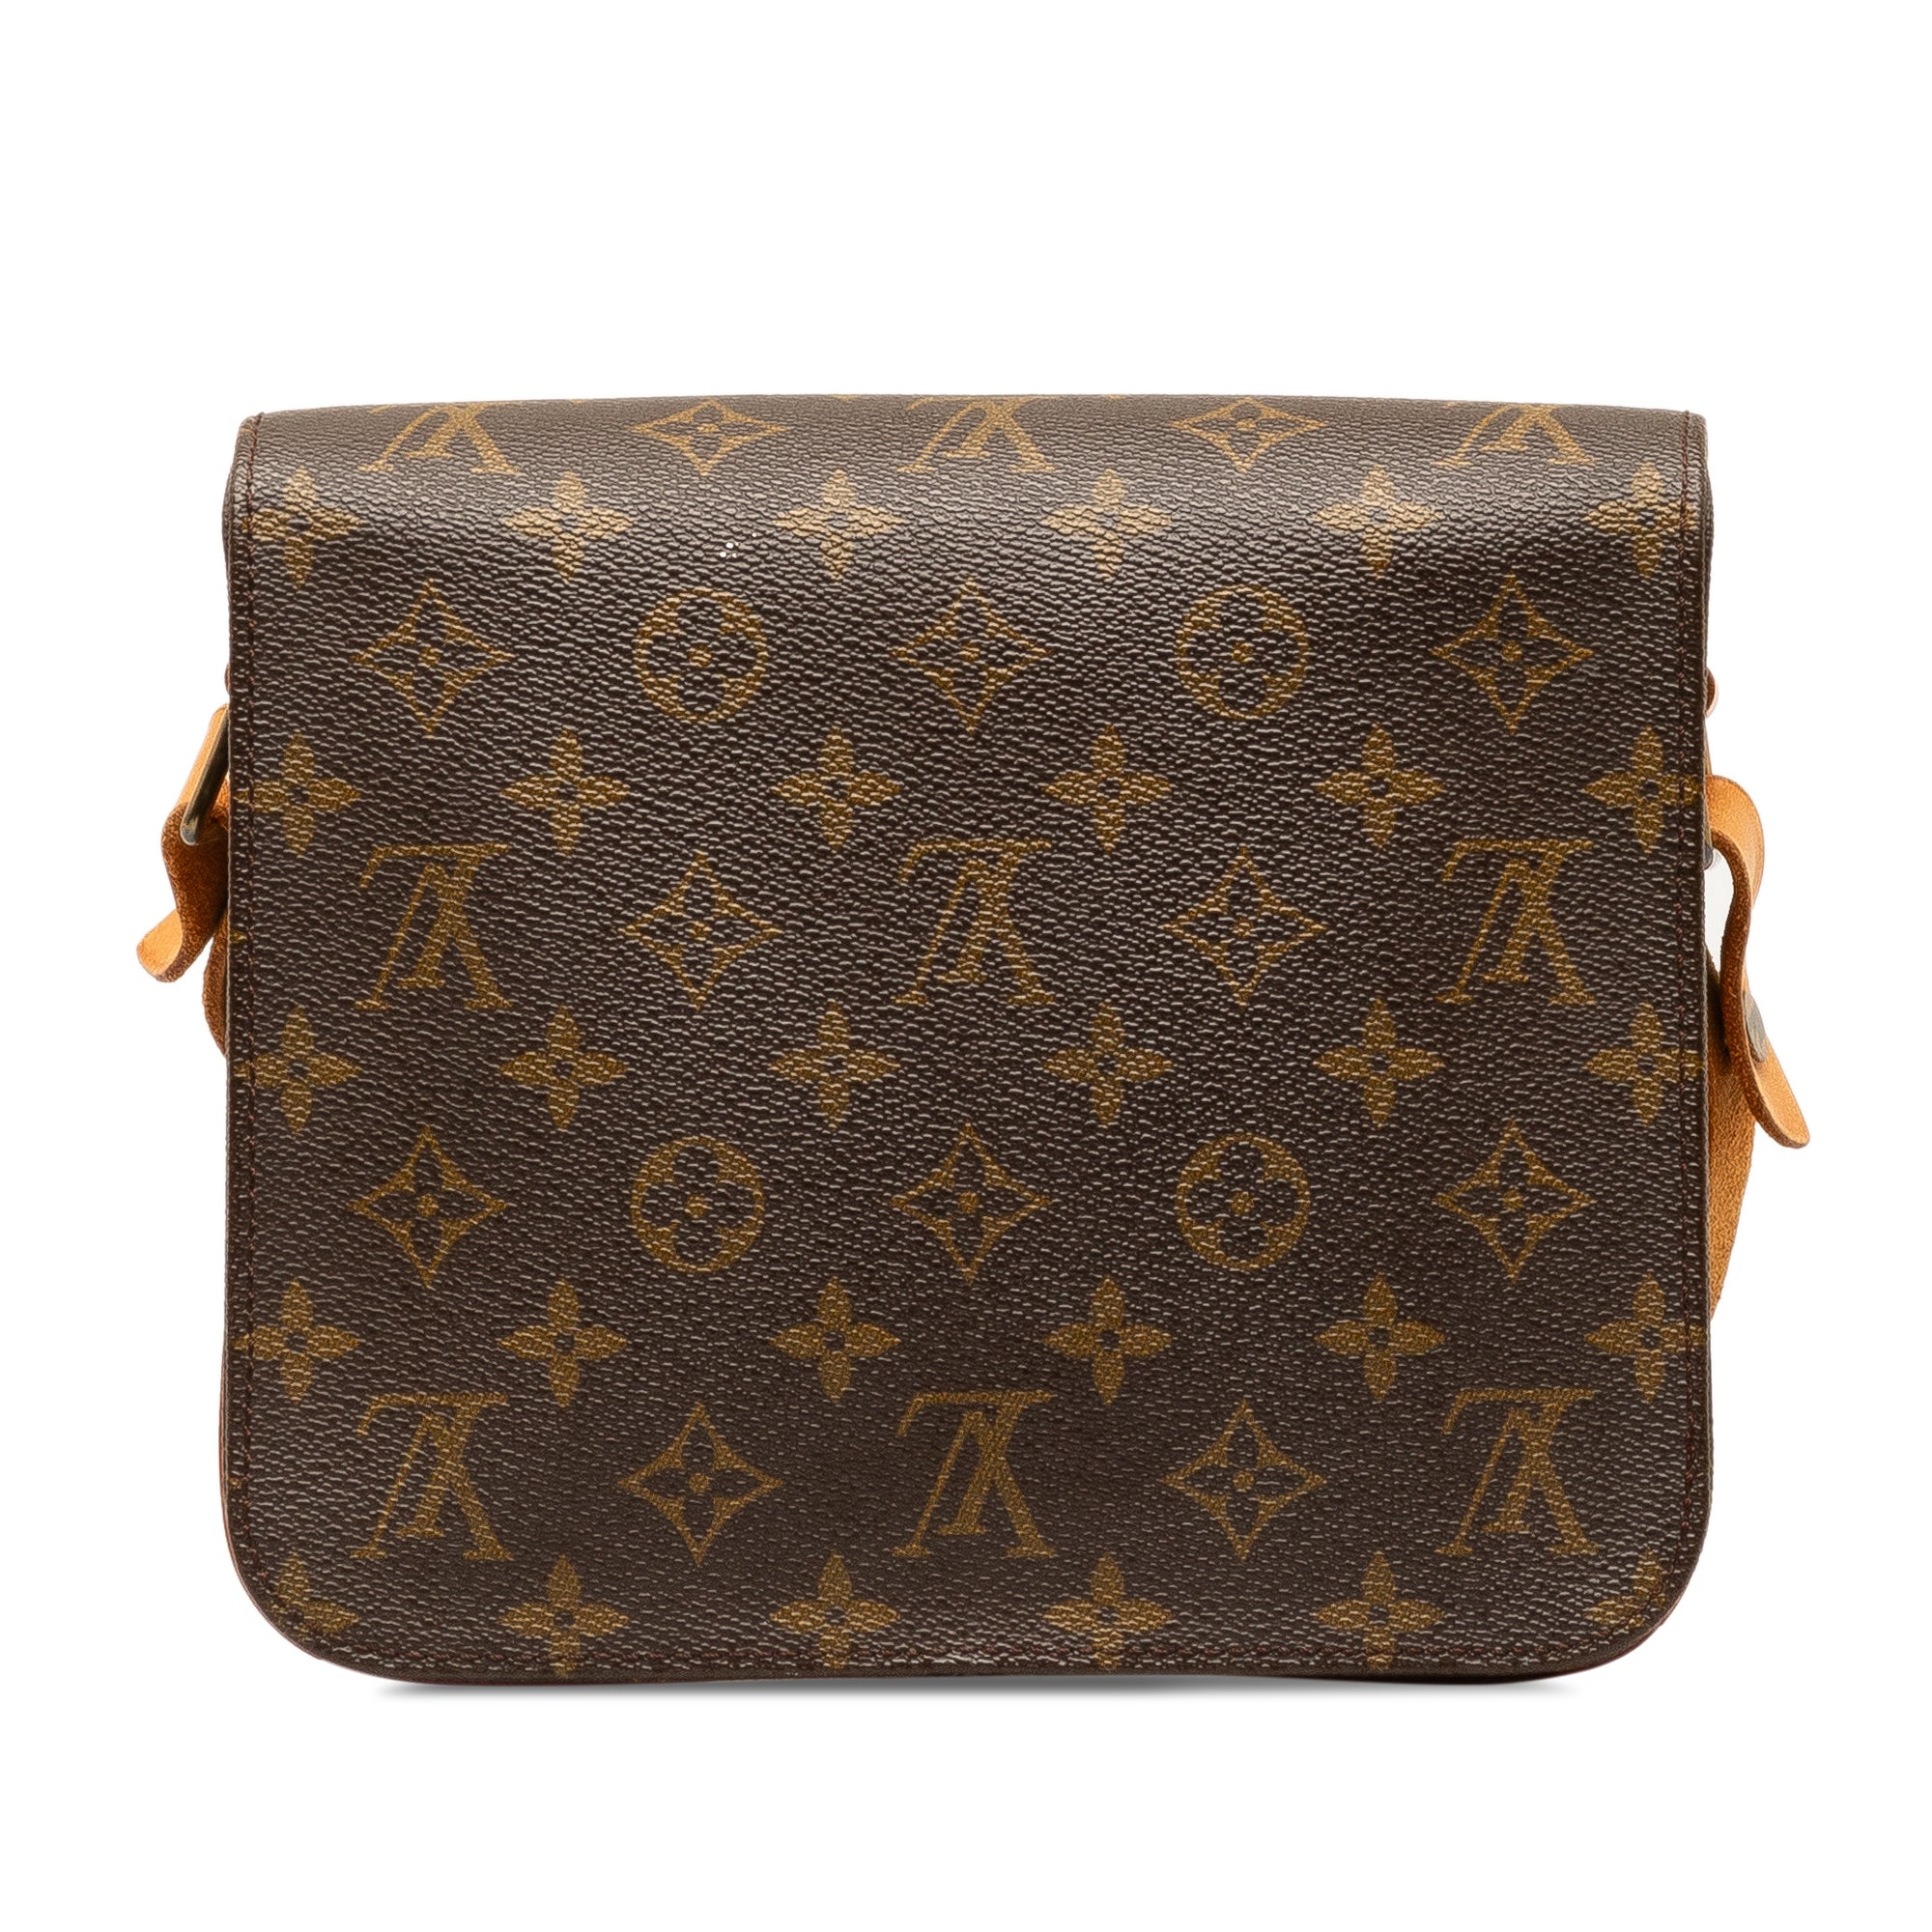 One 1 Supreme x Louis Vuitton Keepall Bandouliere Epi 45 Red